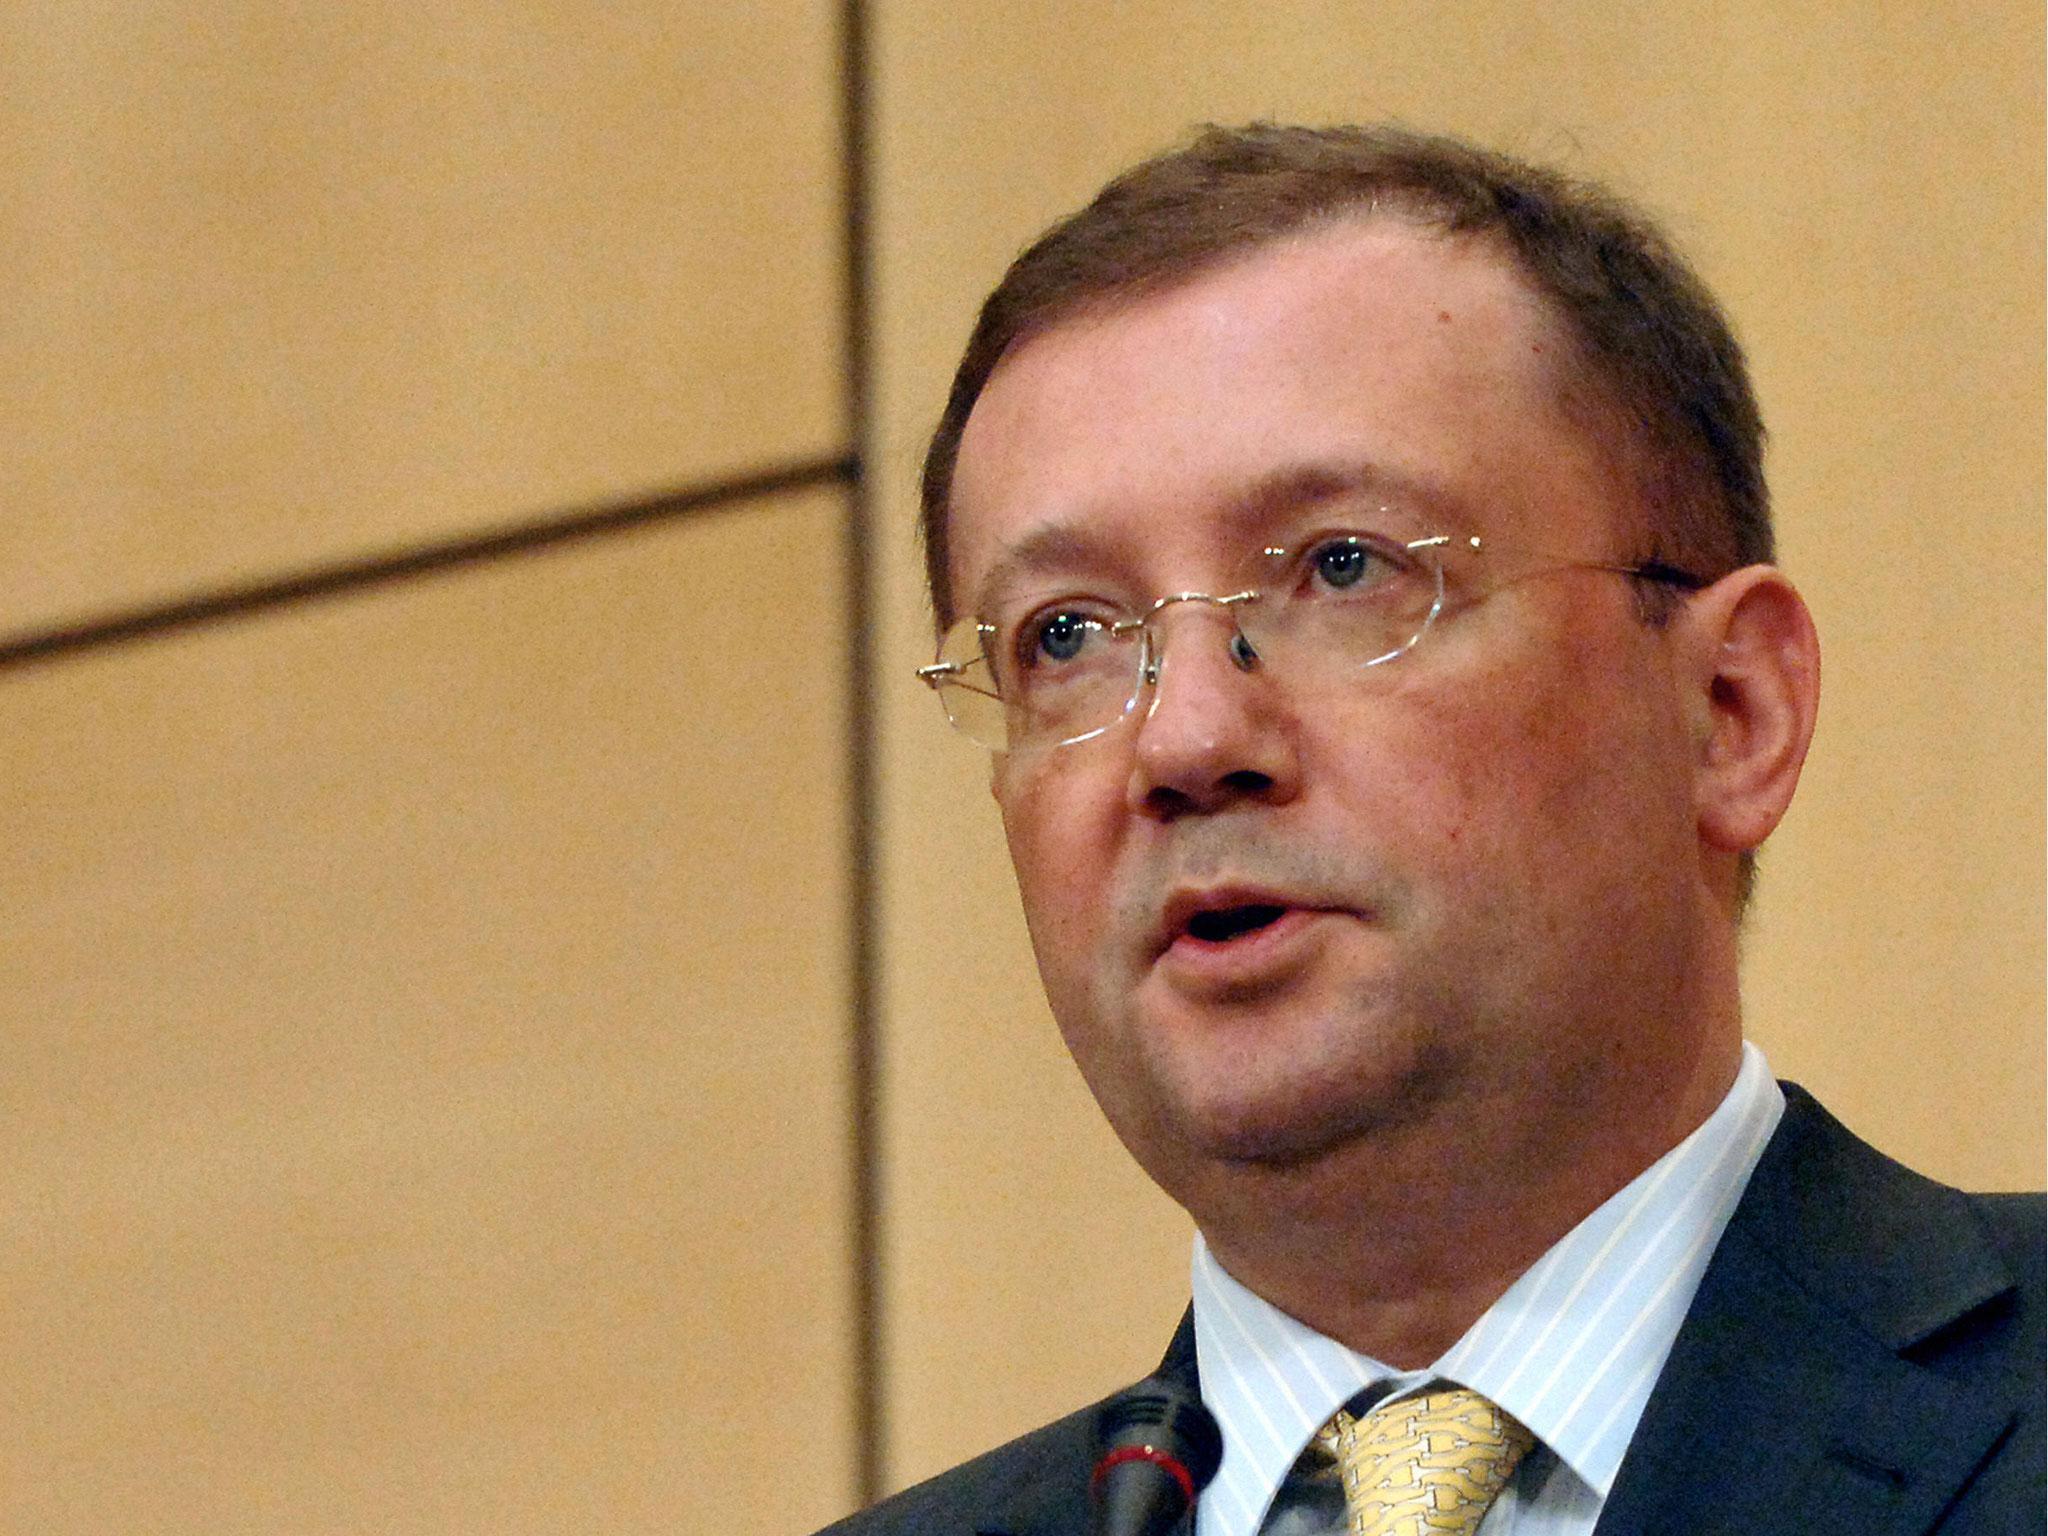 Alexander Yakovenko raised concerns over the length of time it took for visas to be issues to Russian embassy staff